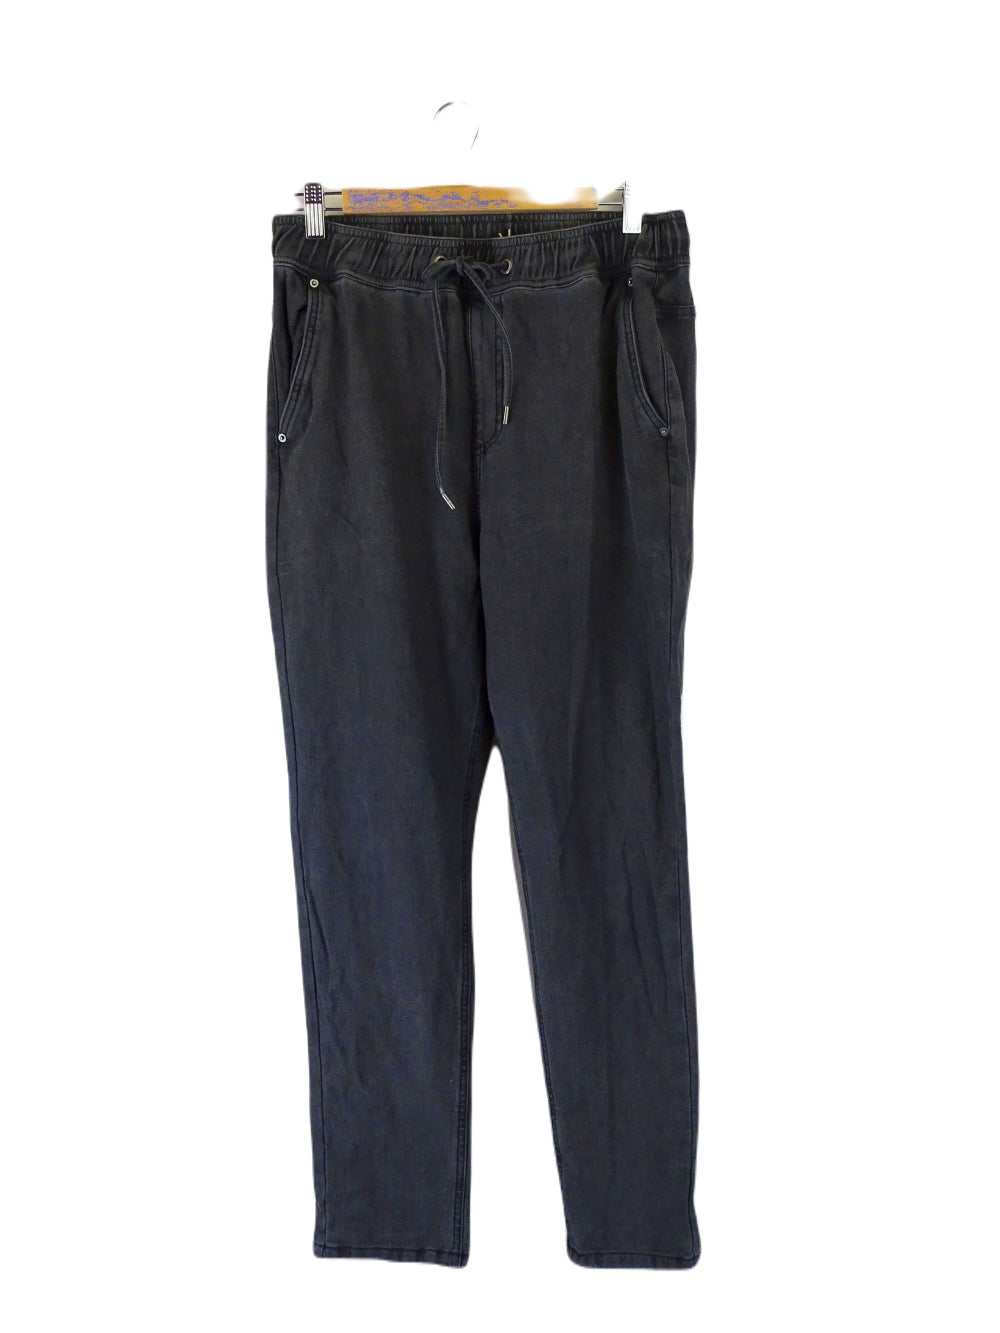 French Connection Charcoal Jeans 10